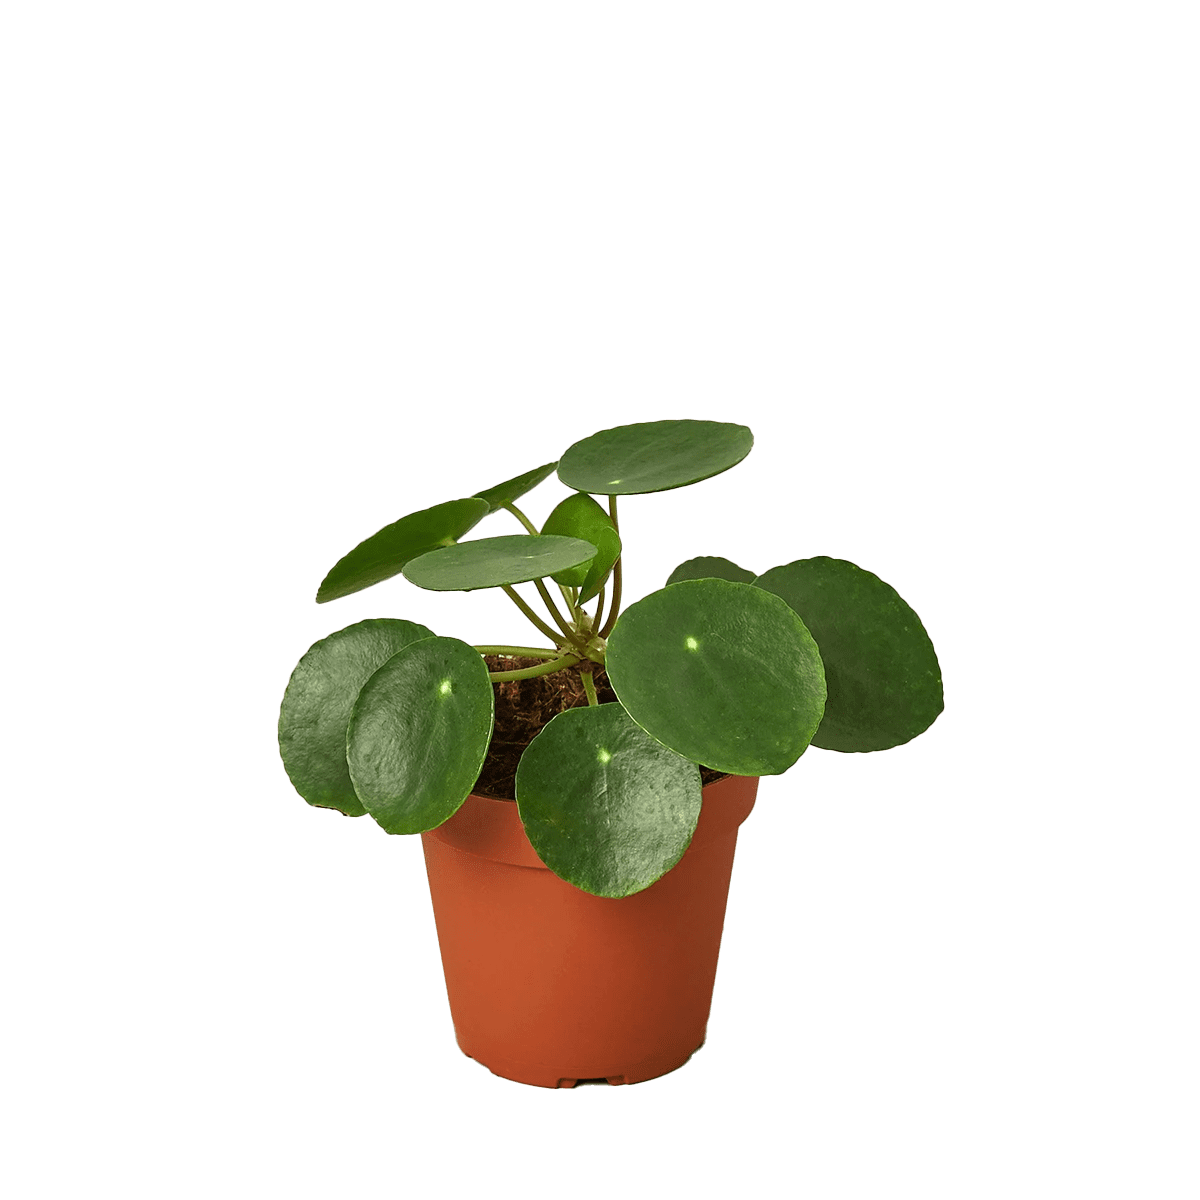 Pilea Peperomioides, House Plants for Sale | Best Indoor Plants | Forget Me Not Flower Market | Bonita Springs Flower Market | Cape Coral, Fort Myers, Naples | Indoor Plants, Outdoor Plants, Garden Plants, Flower plants Nursery, Wholesale Flowers and more